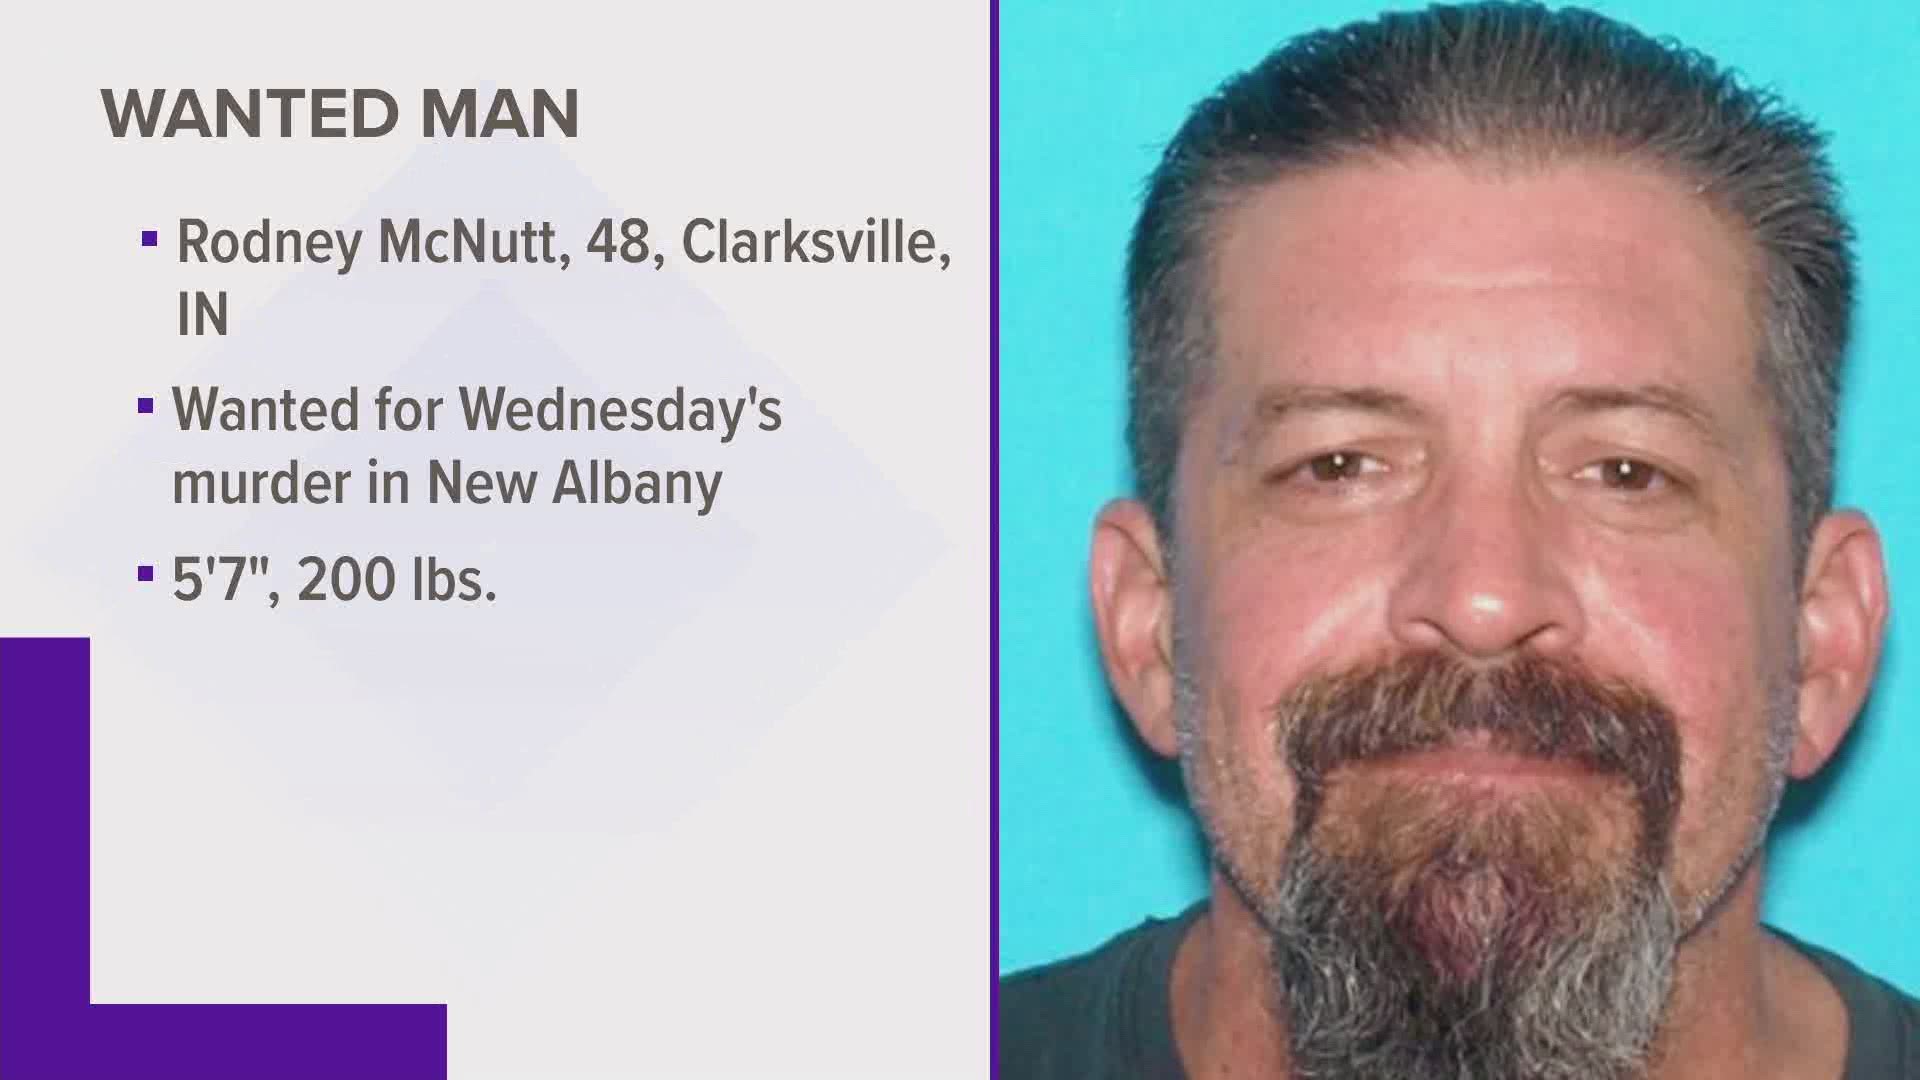 Police say Rodney McNutt is wanted in connection to a homicide in New Albany, Indiana on Wednesday night.